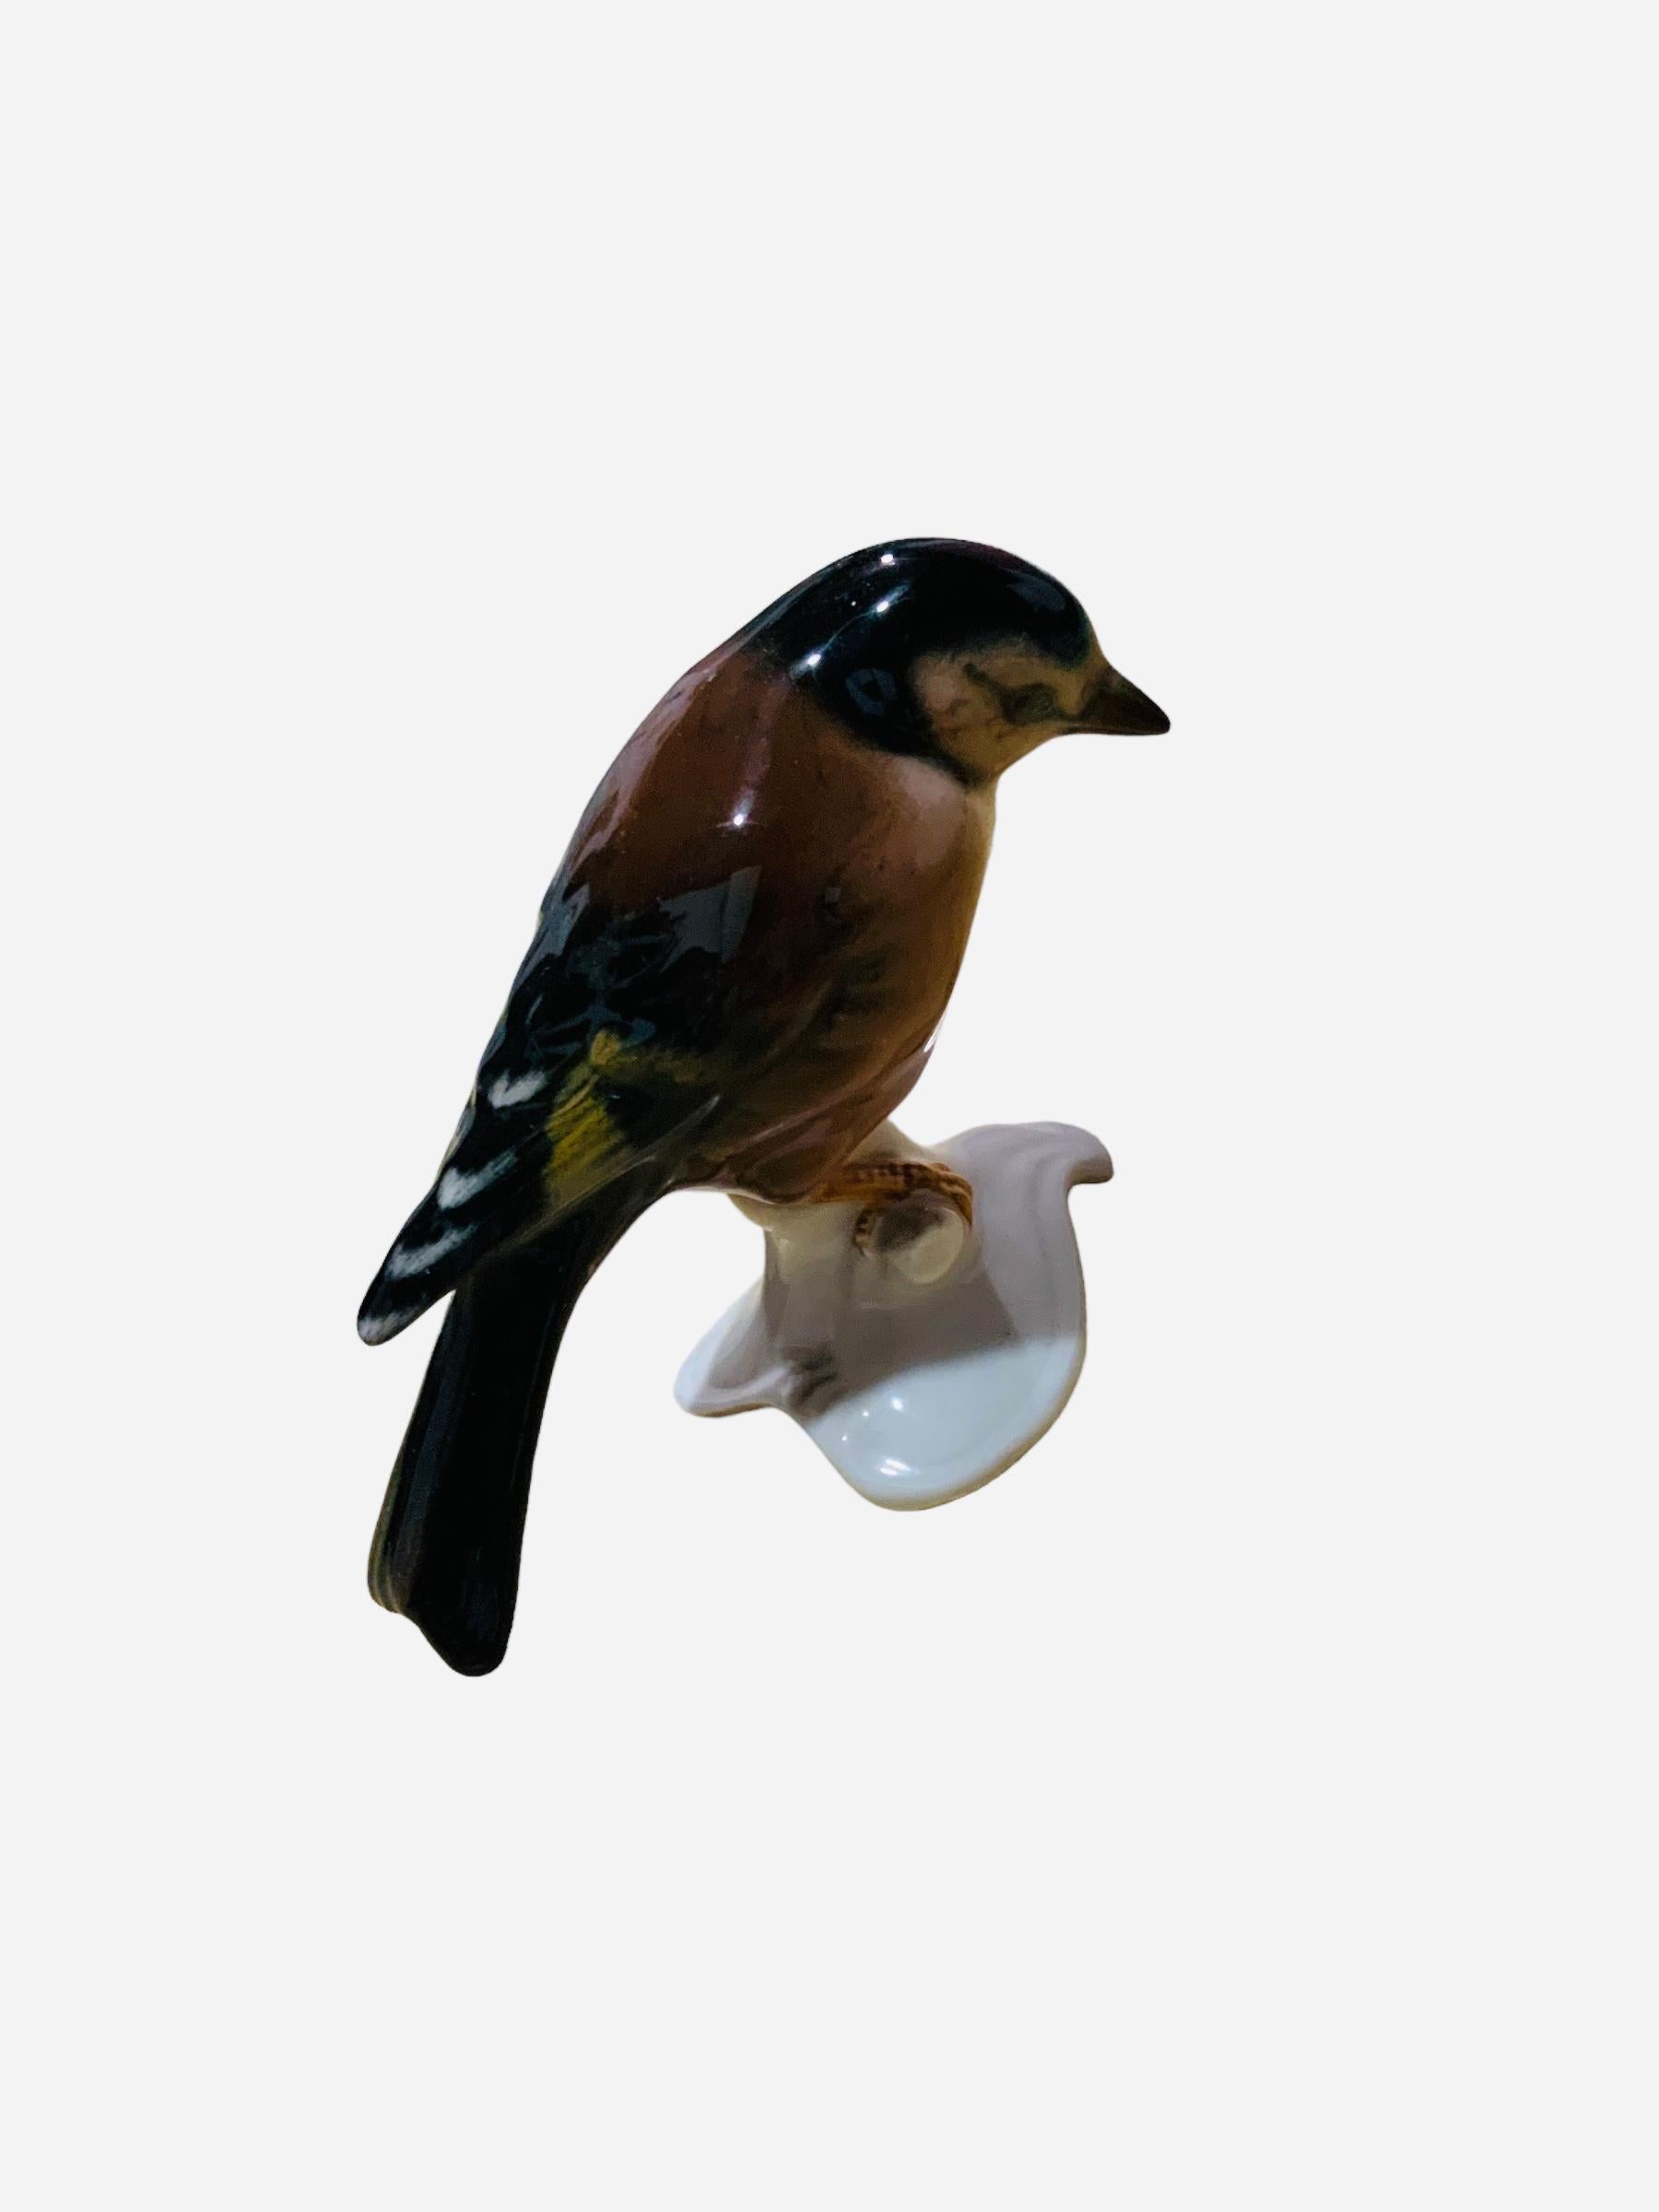 Molded Goebel Porcelain Hand Painted Bird Figurine of a Goldfinch For Sale